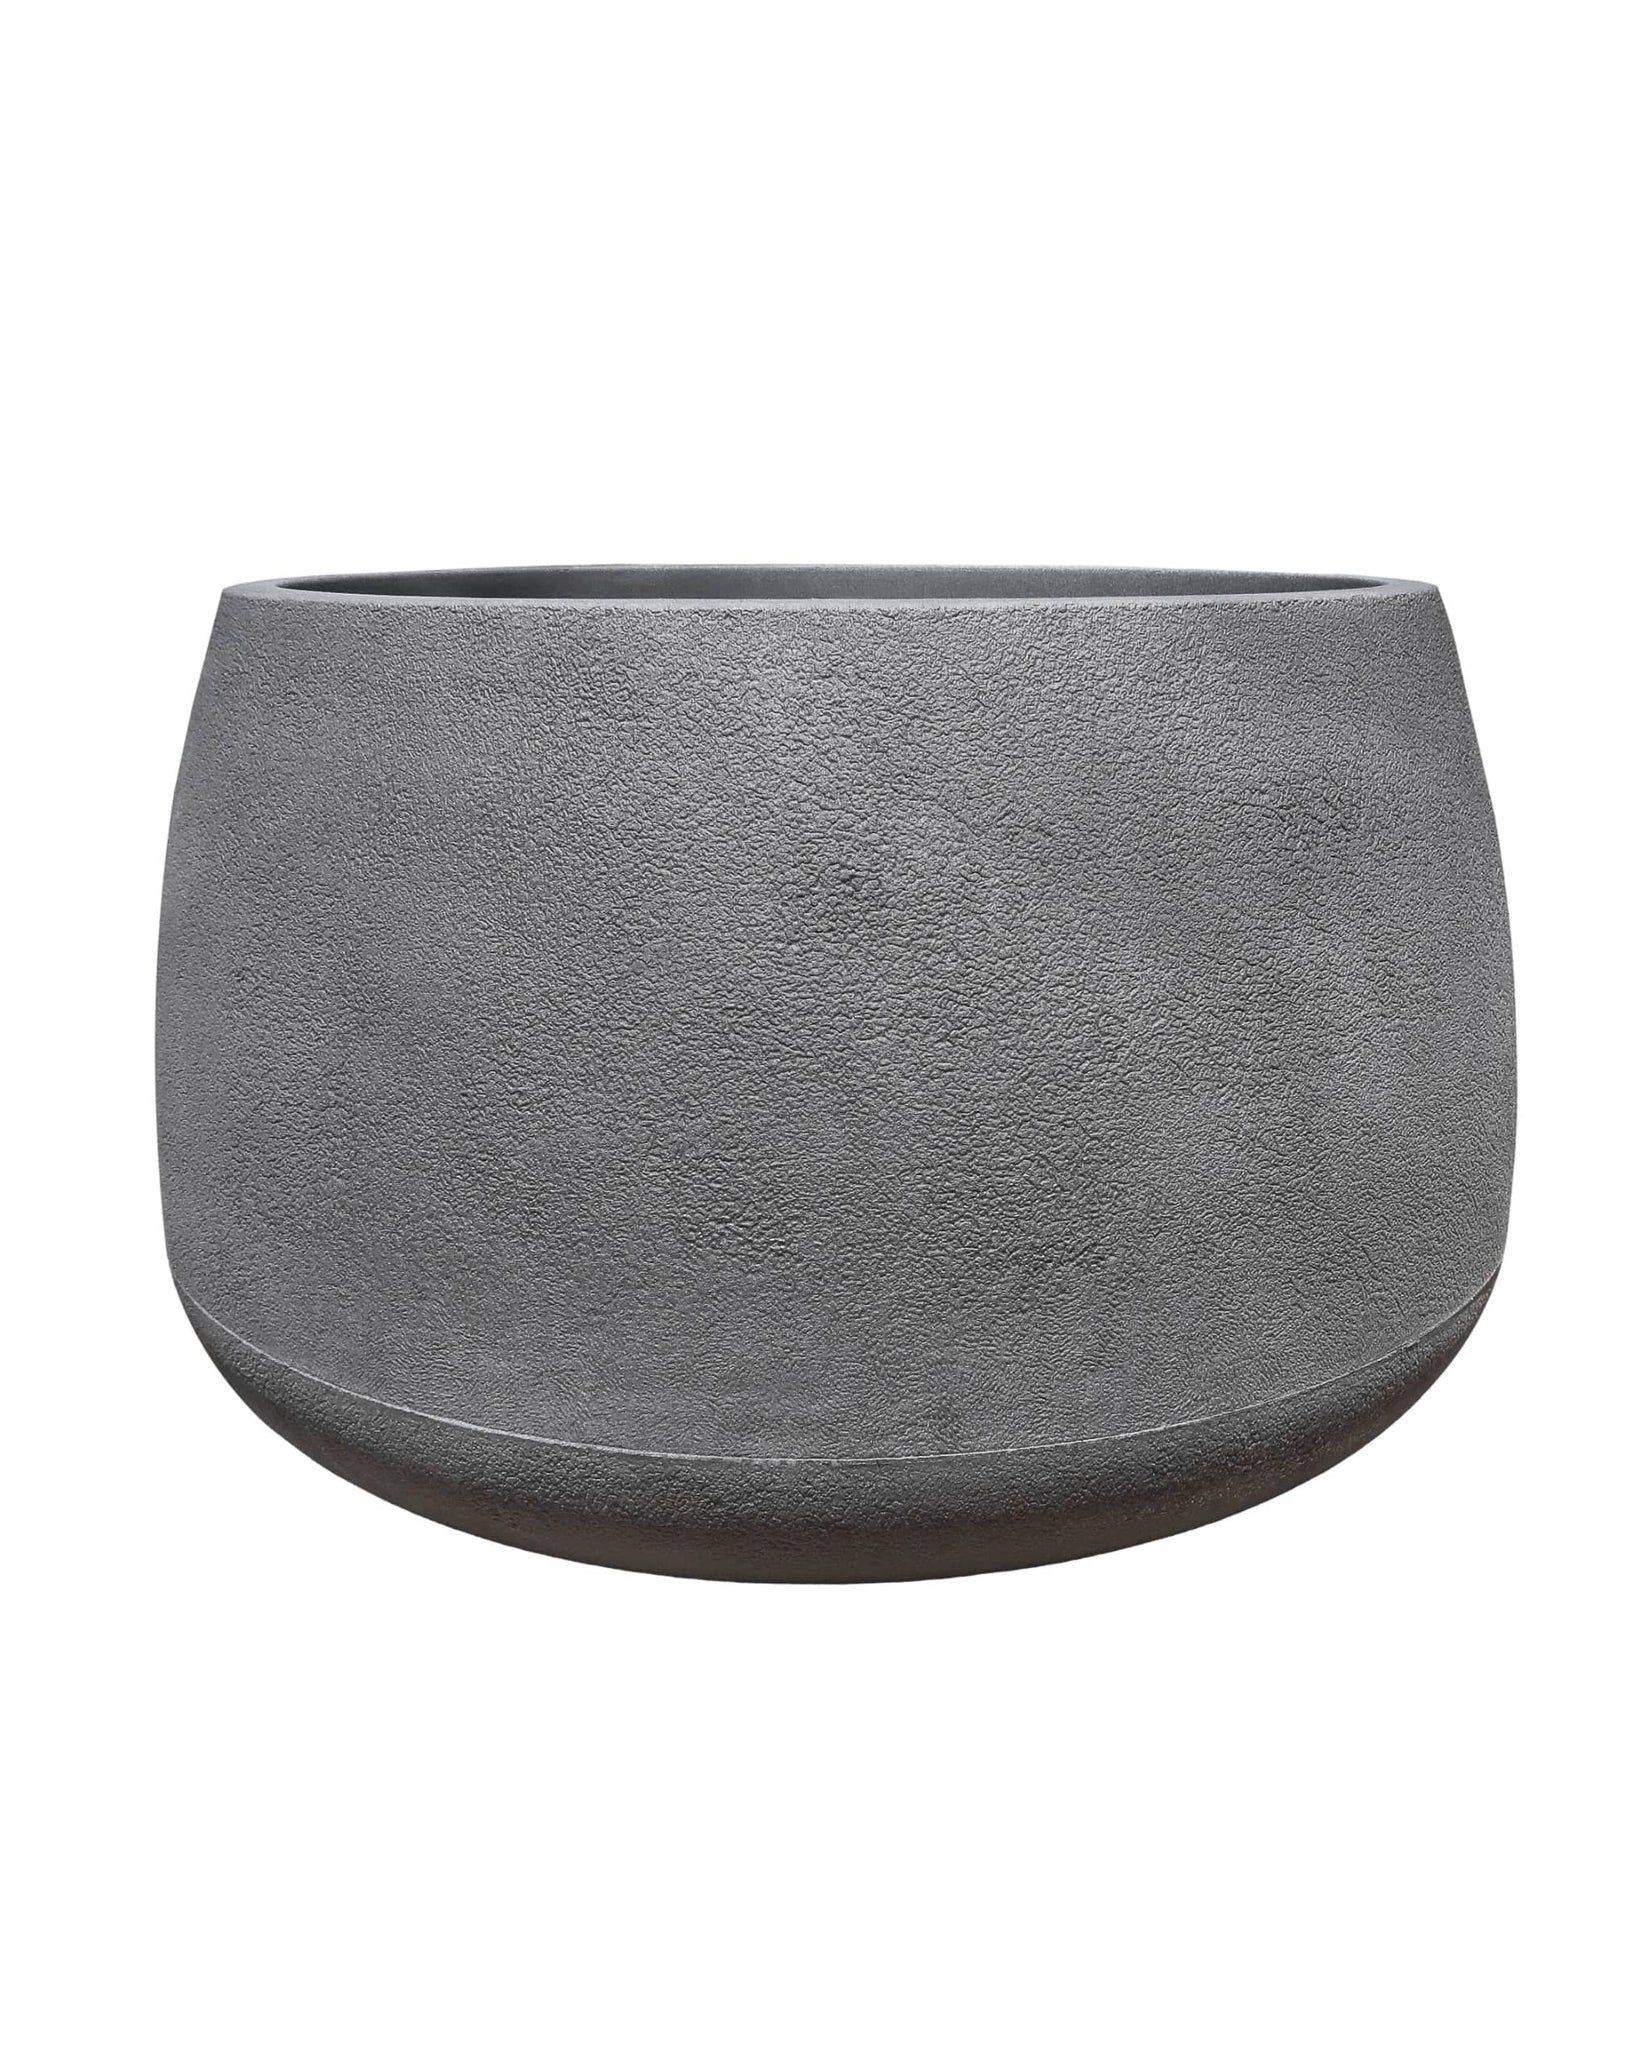 Black Slate Bios Low Japi planter, by Florastyle by Hingham, Low rise modern contemporary plant pot with stunning slightly textured finish, and wide neck for planting. Florastyle by Hingham.